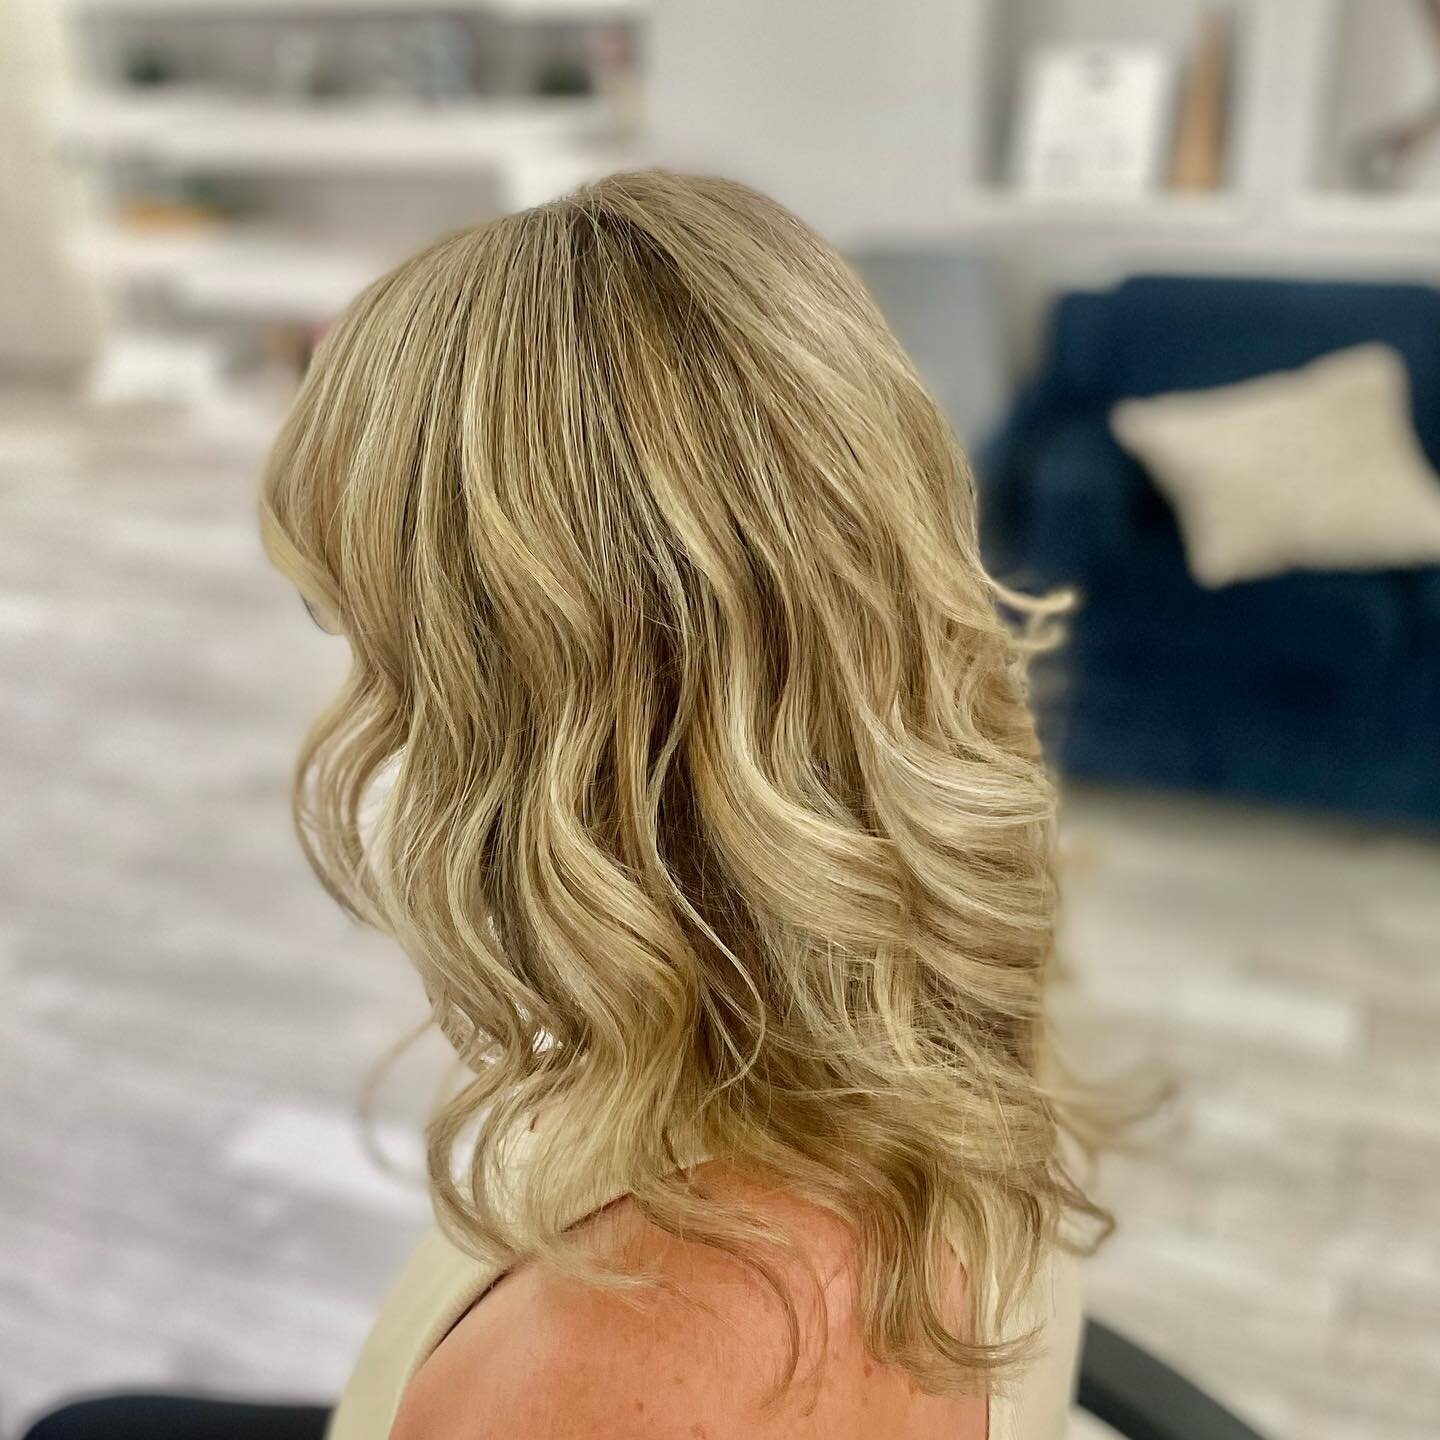 &ldquo;Laughter is a sunbeam of the soul.&rdquo;
&bull;
&bull;

#ahwatukee #ahwatukeehairstylist #ahwatukeesalon #chandleraz #chandlerhairstylist #chandlerhair #chandlerhairsalon #mesahairstylist #mesasalon #tempehairstylist #tempesalon #tempe #phoen